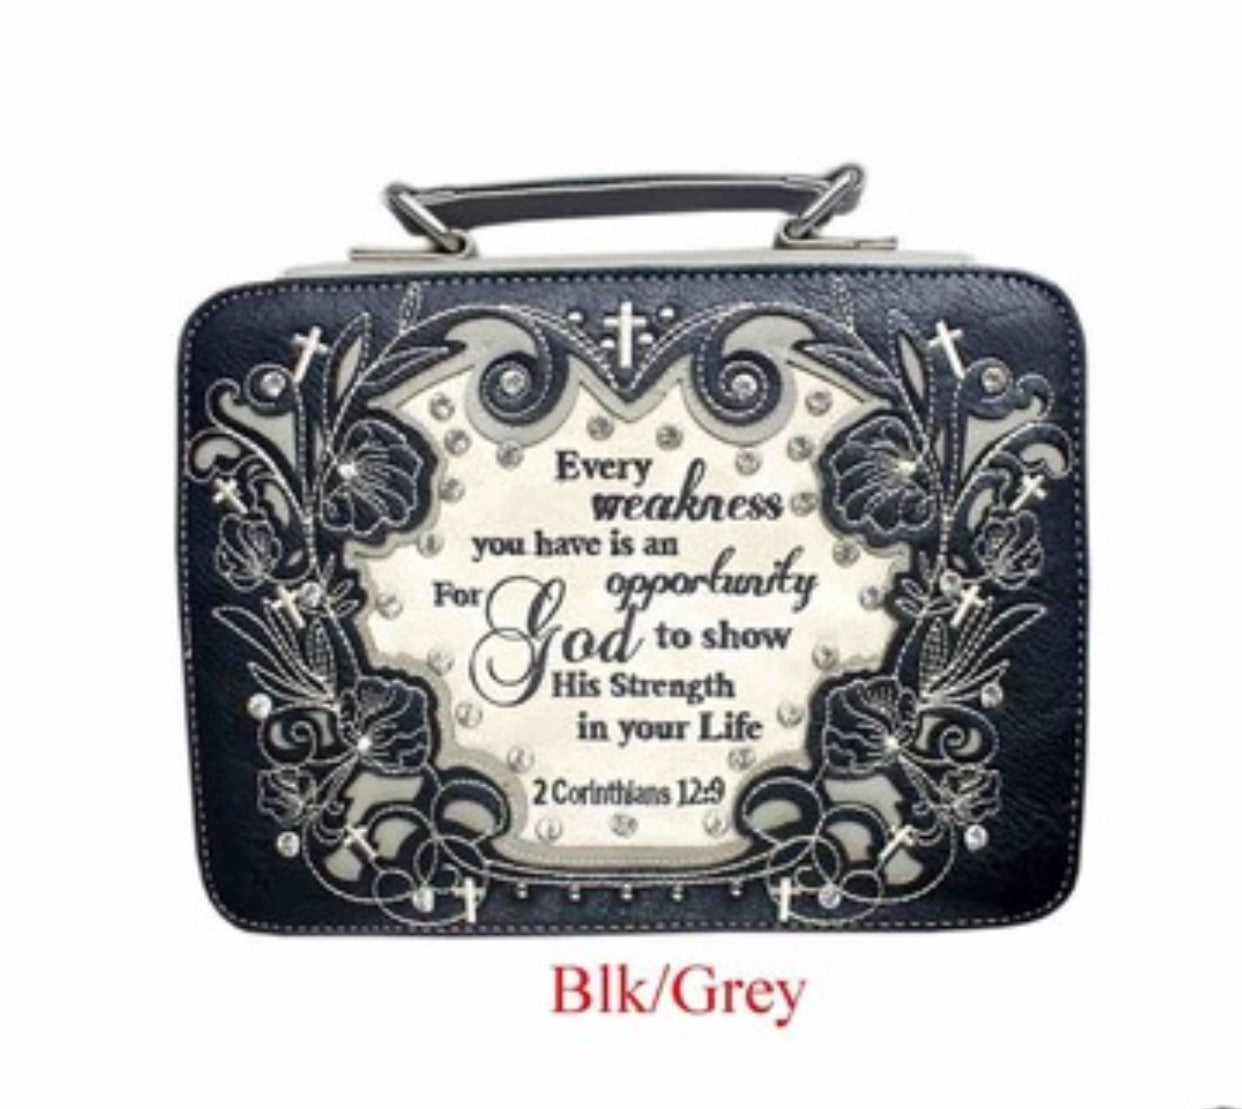 Black/grey Every weakness bible cover